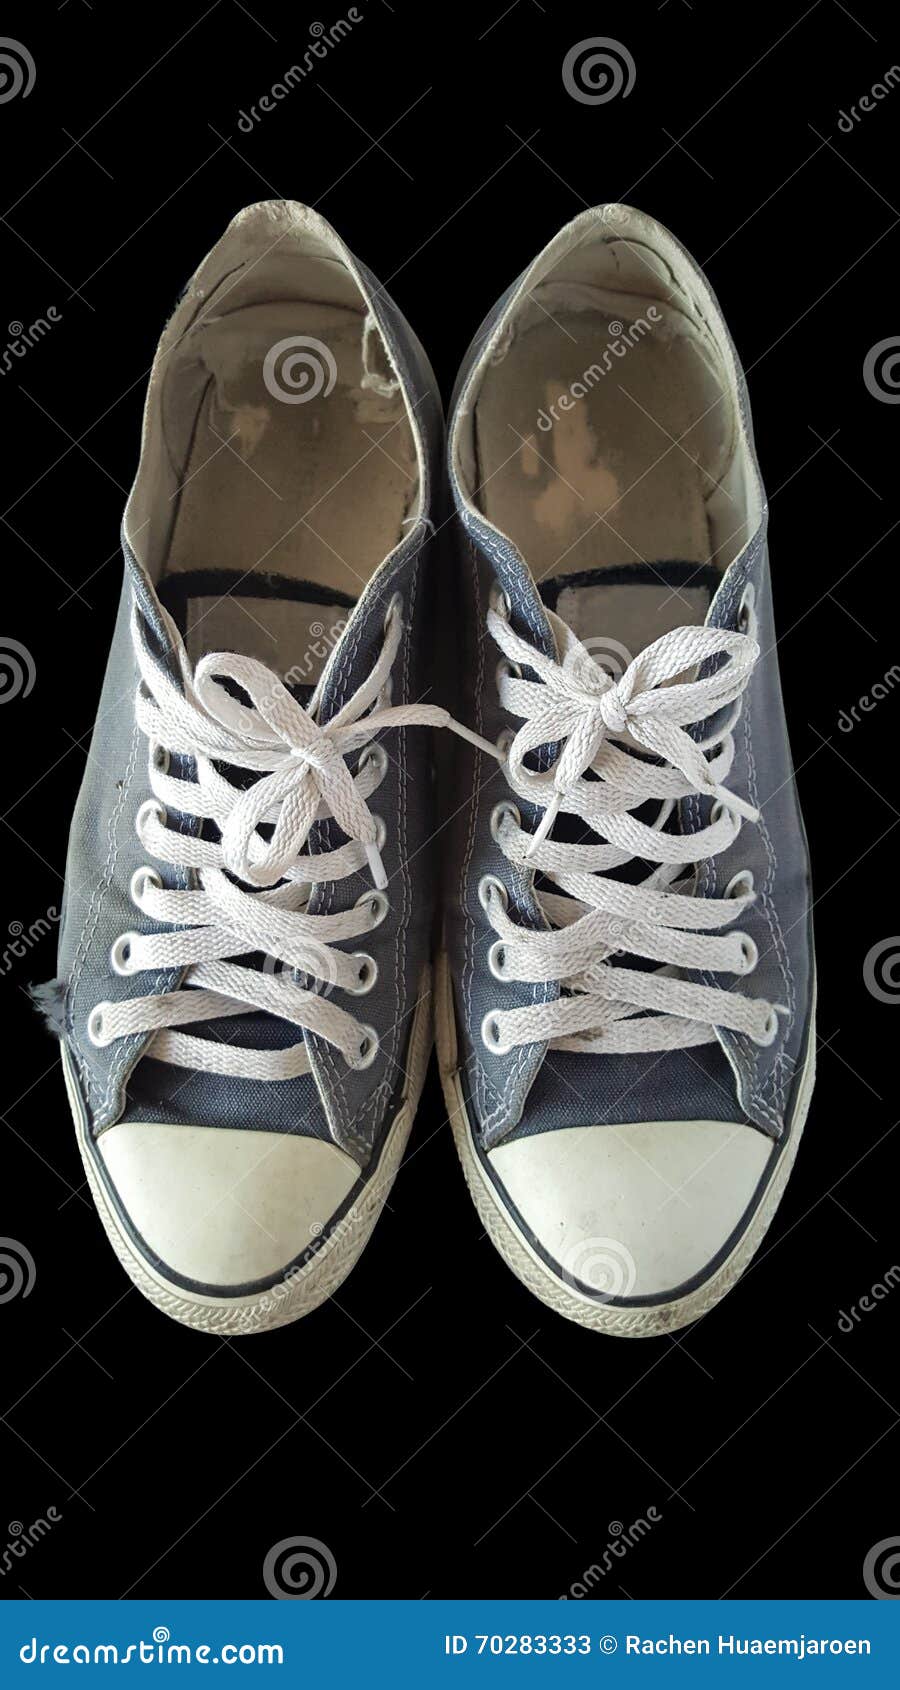 Old shoe top view isolate stock image. Image of classic - 70283333